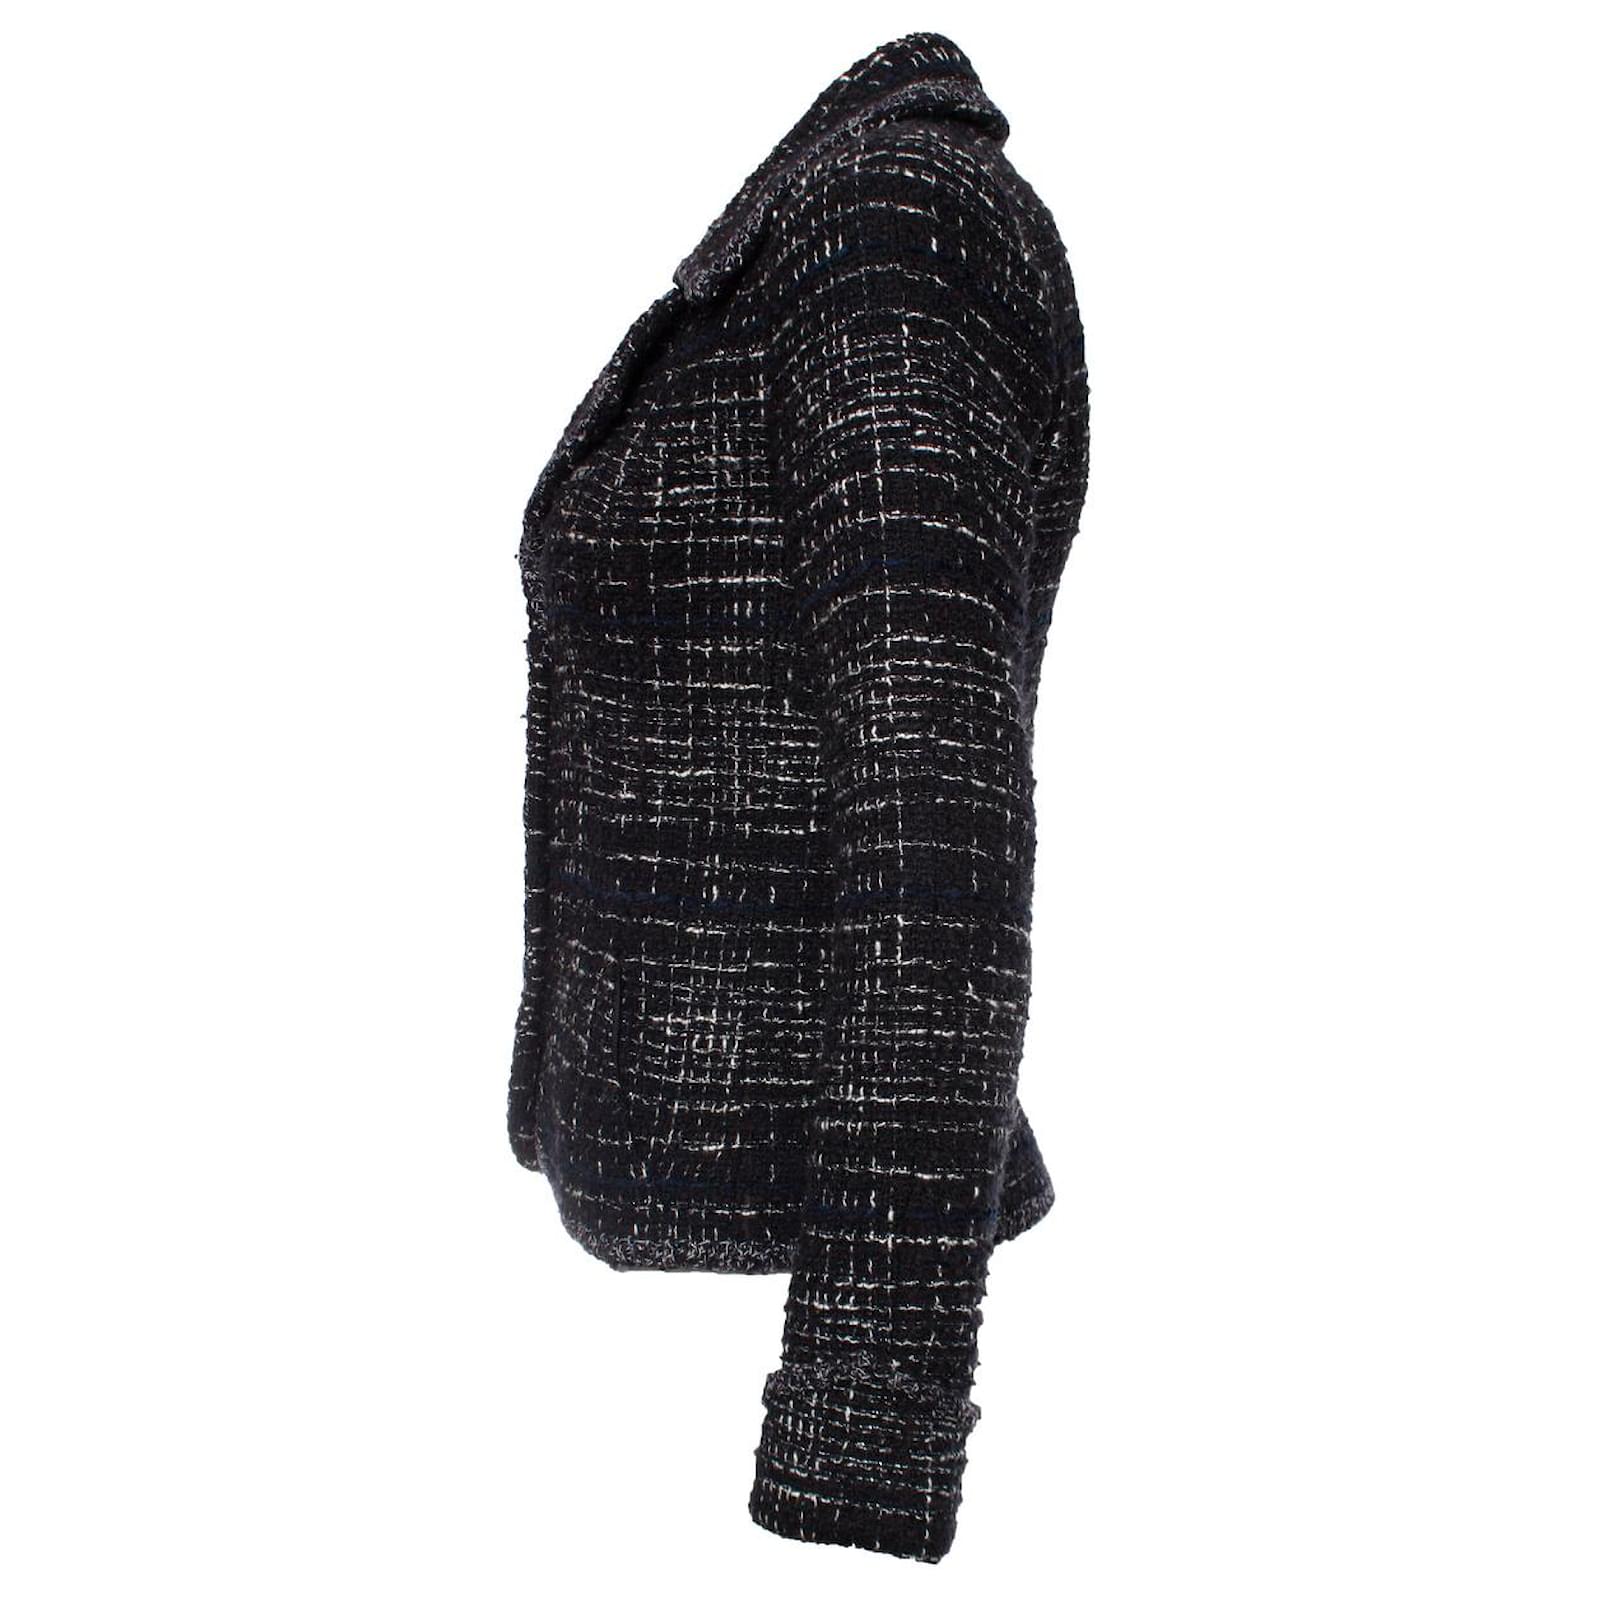 Black and White Wool Bouclé Jacket 46, 1995, Handbags & Accessories, The  Chanel Collection, 2022